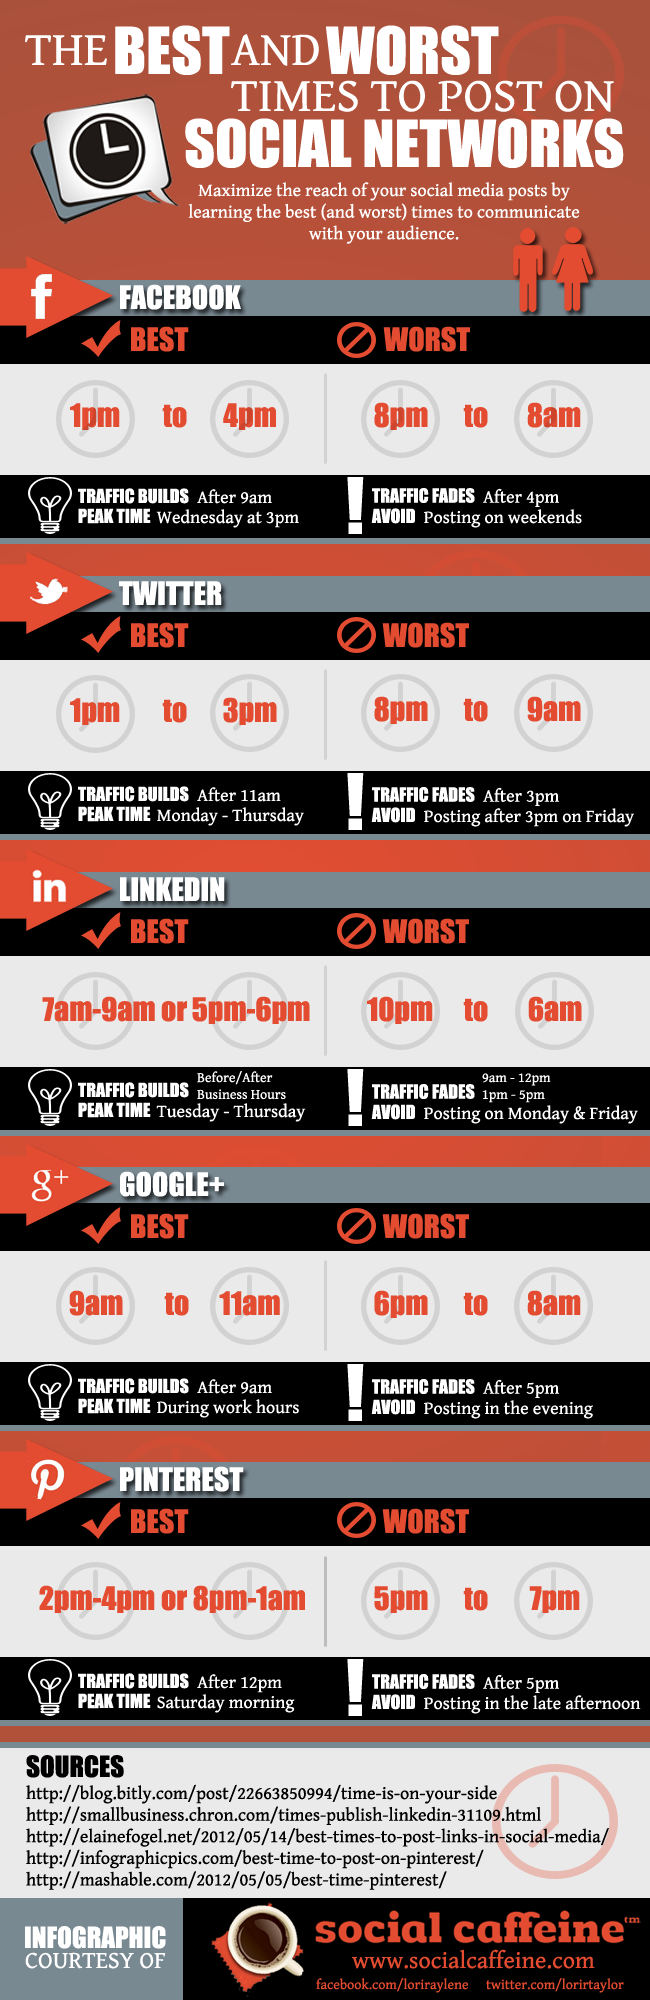 Best and Worst Times to Post on Social Networks